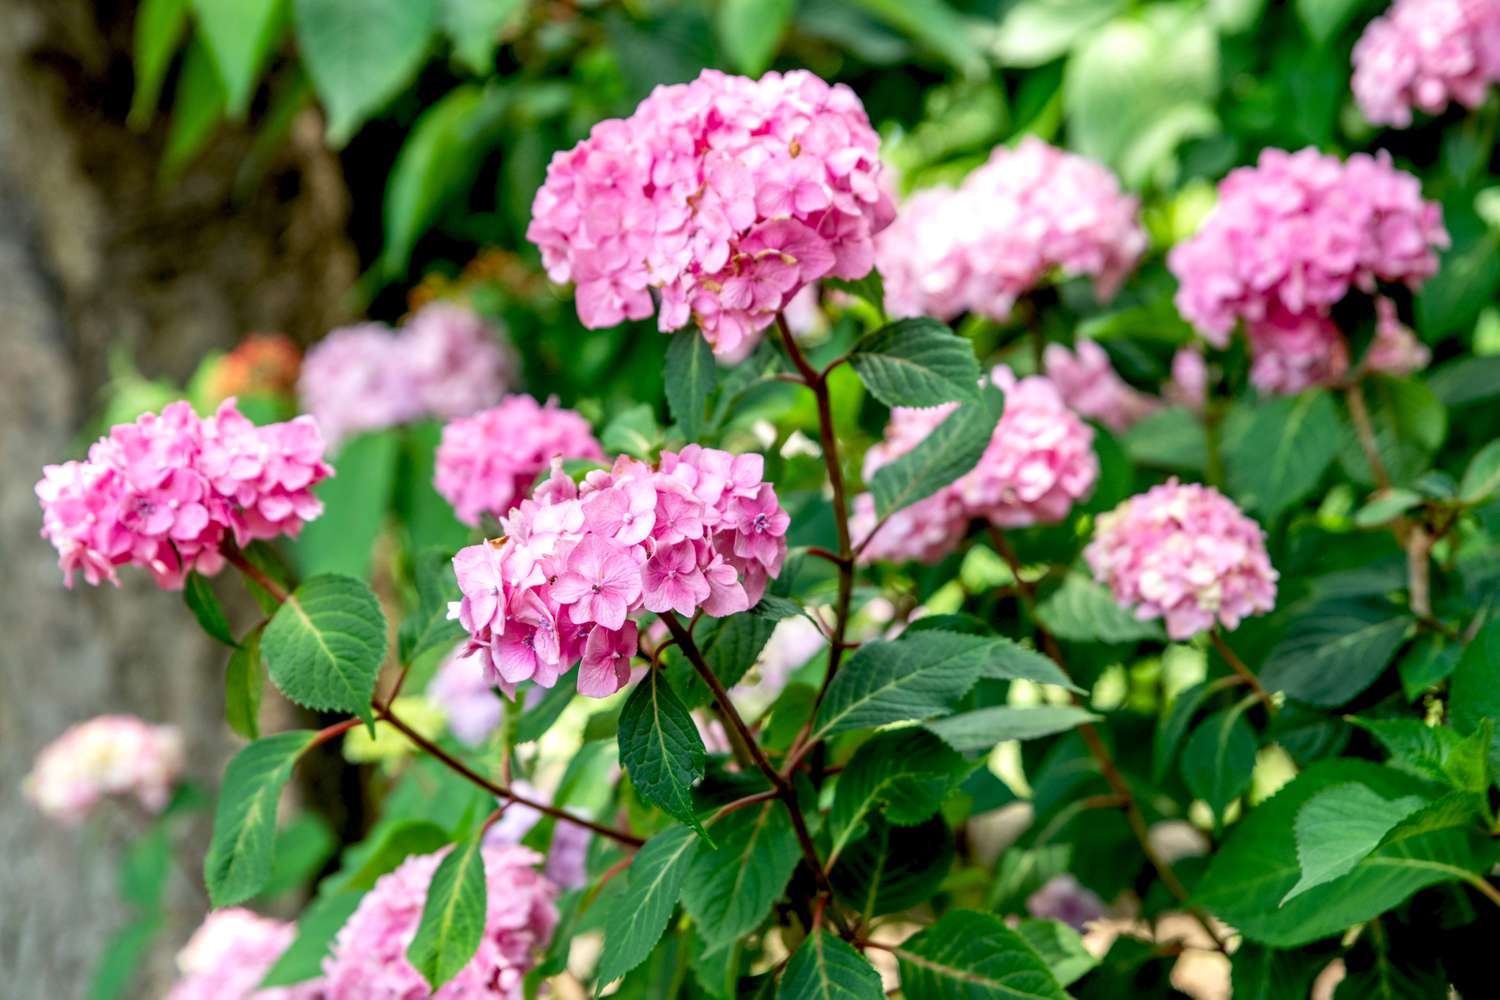 Bloomstruck hydrangea shrub with tall stems and pink flower clusters on branch ends